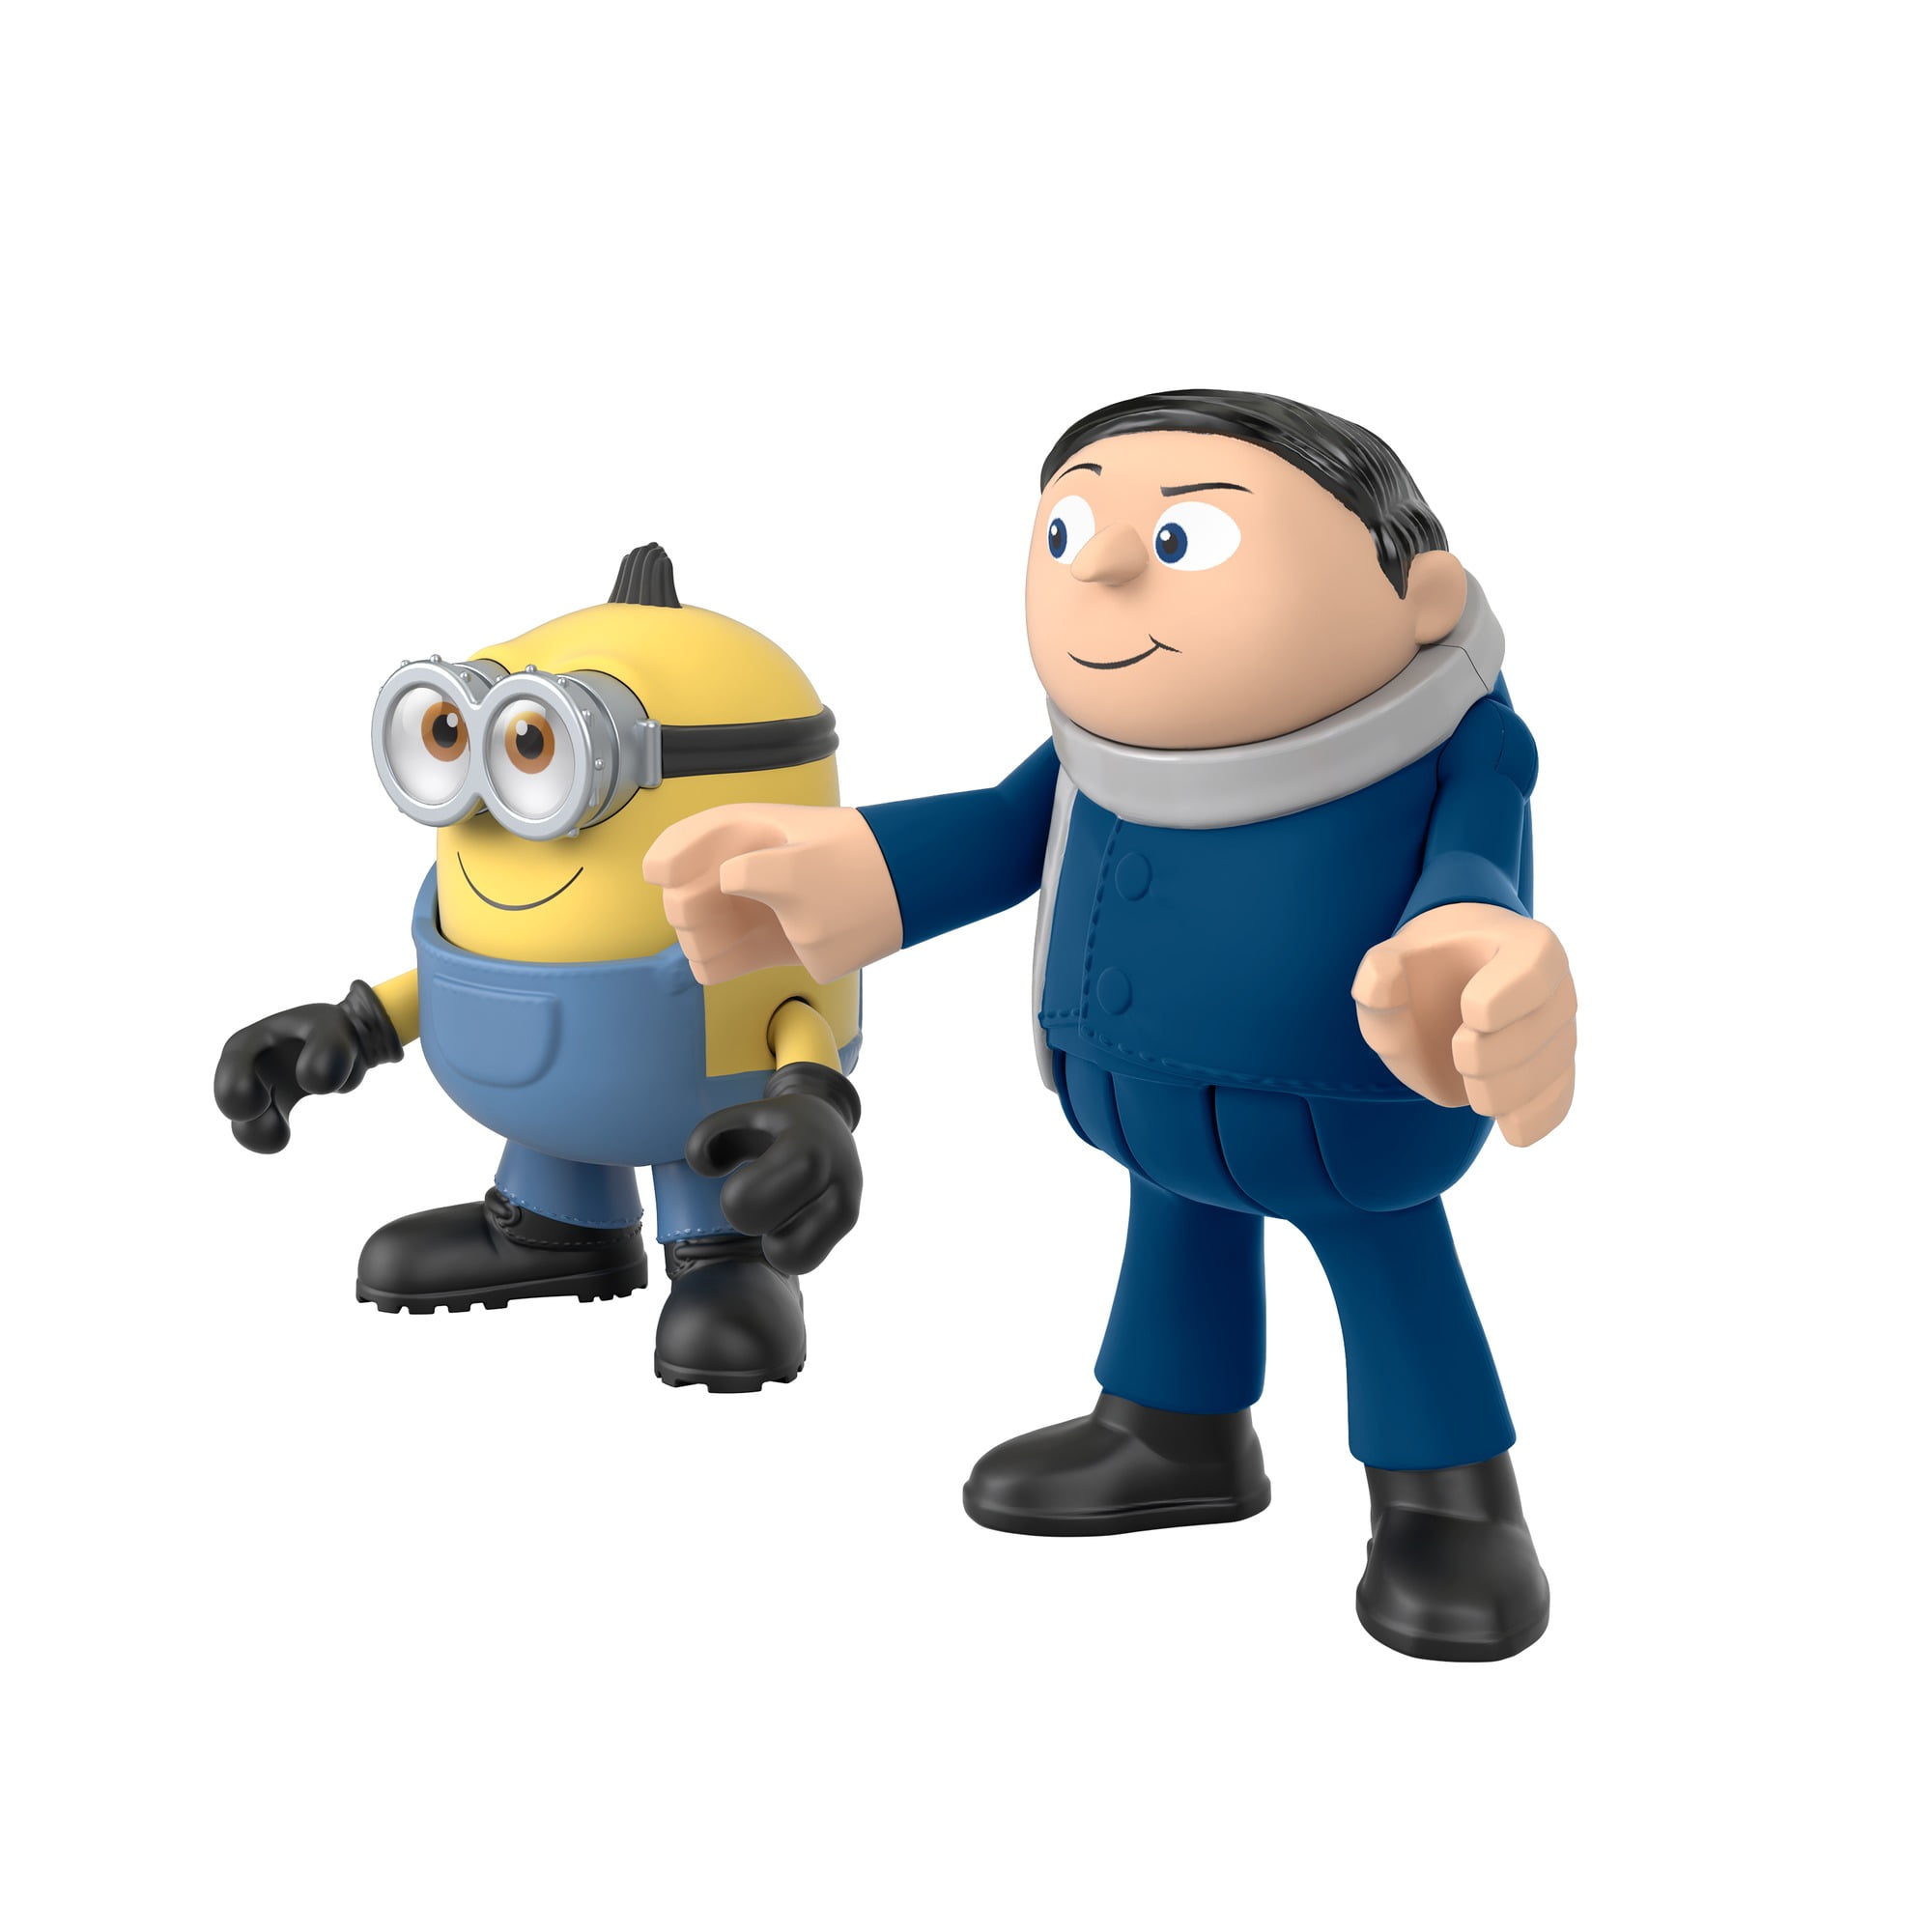 Minions The Rise of Gru by Imaginext "otto and Gru" for sale online 